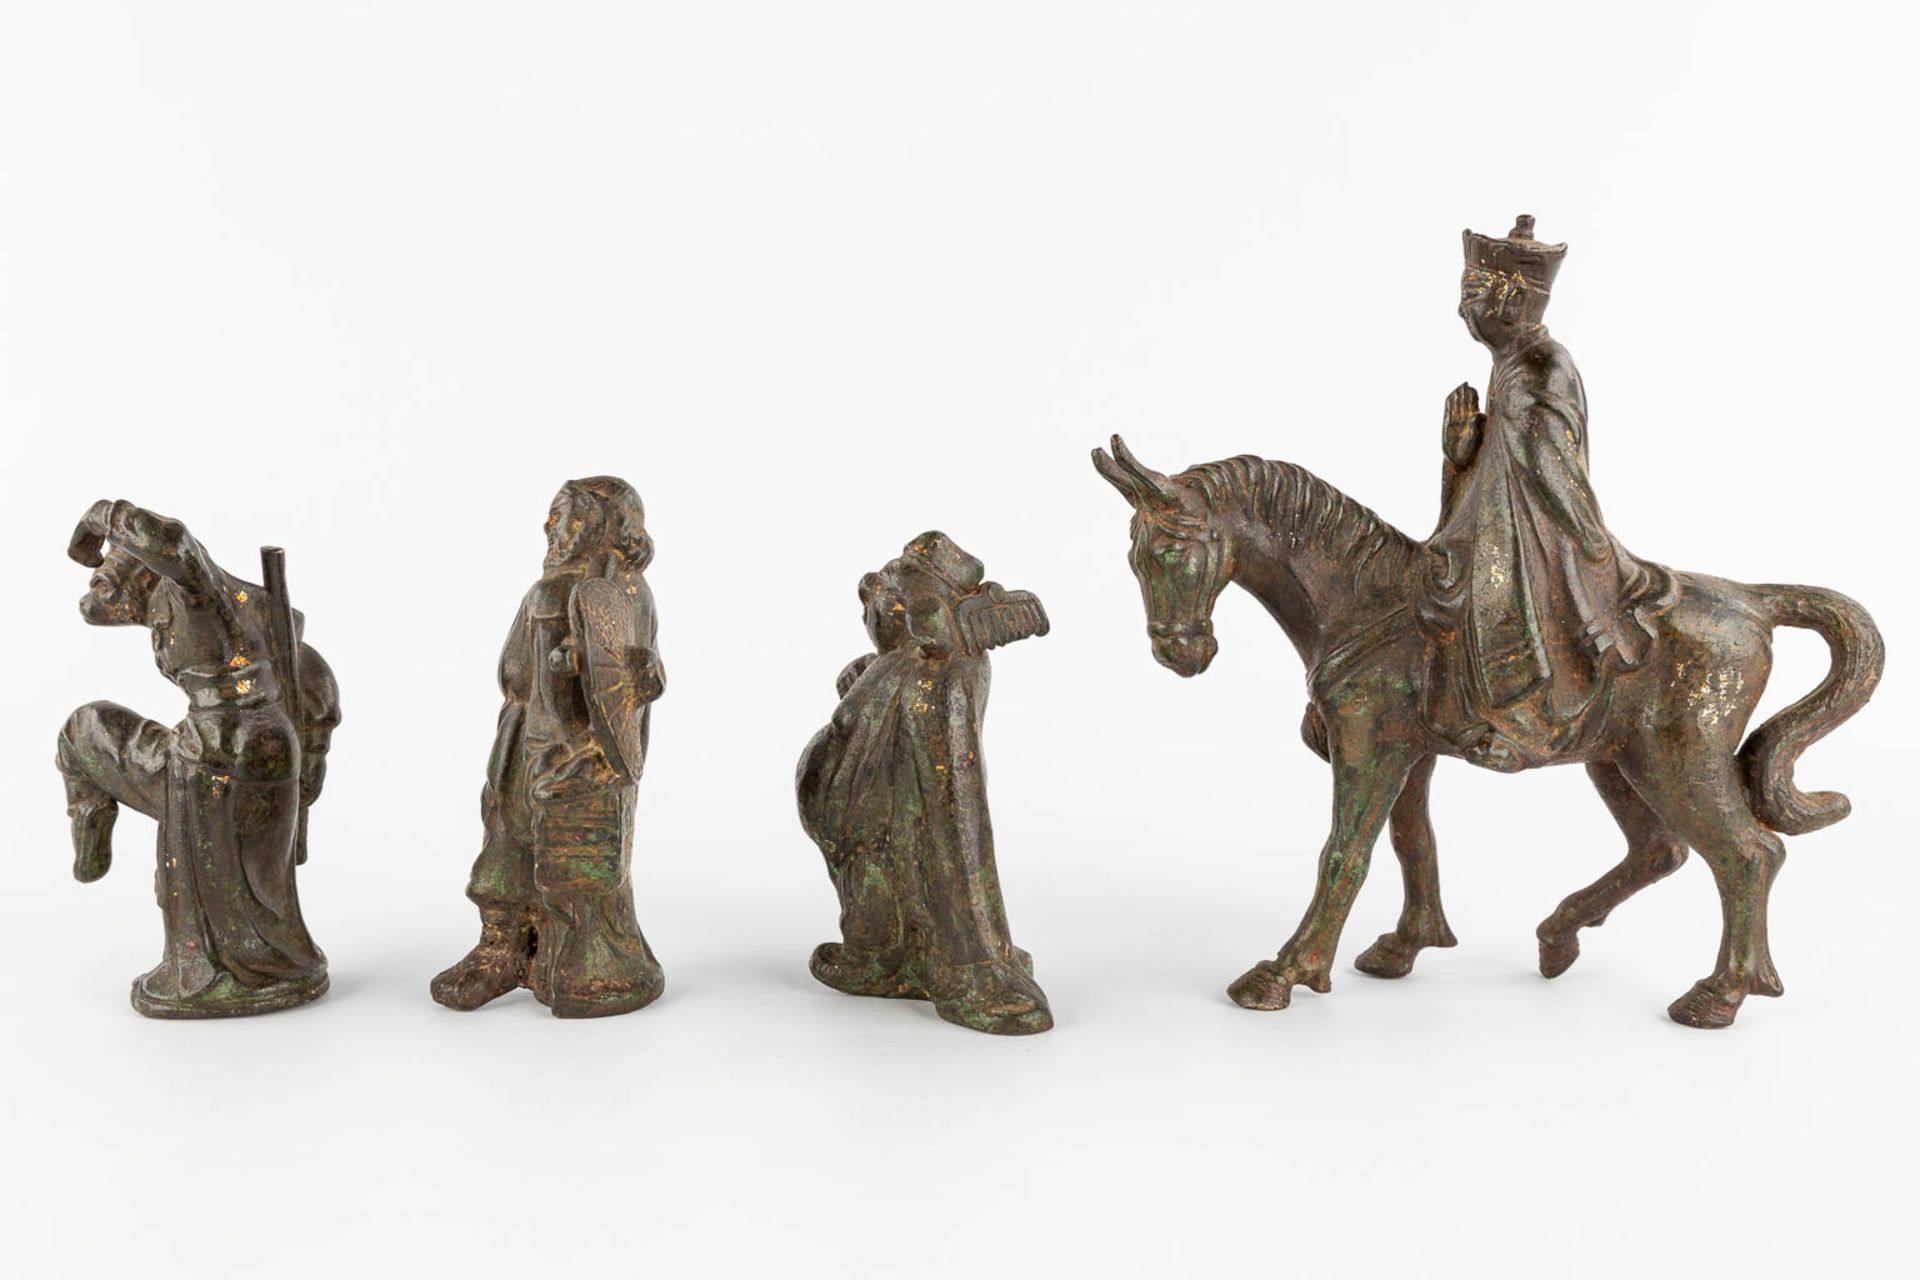 4 Chinese figurines, made of bronze. (L:7 x W:18 x H:18 cm) - Image 6 of 12